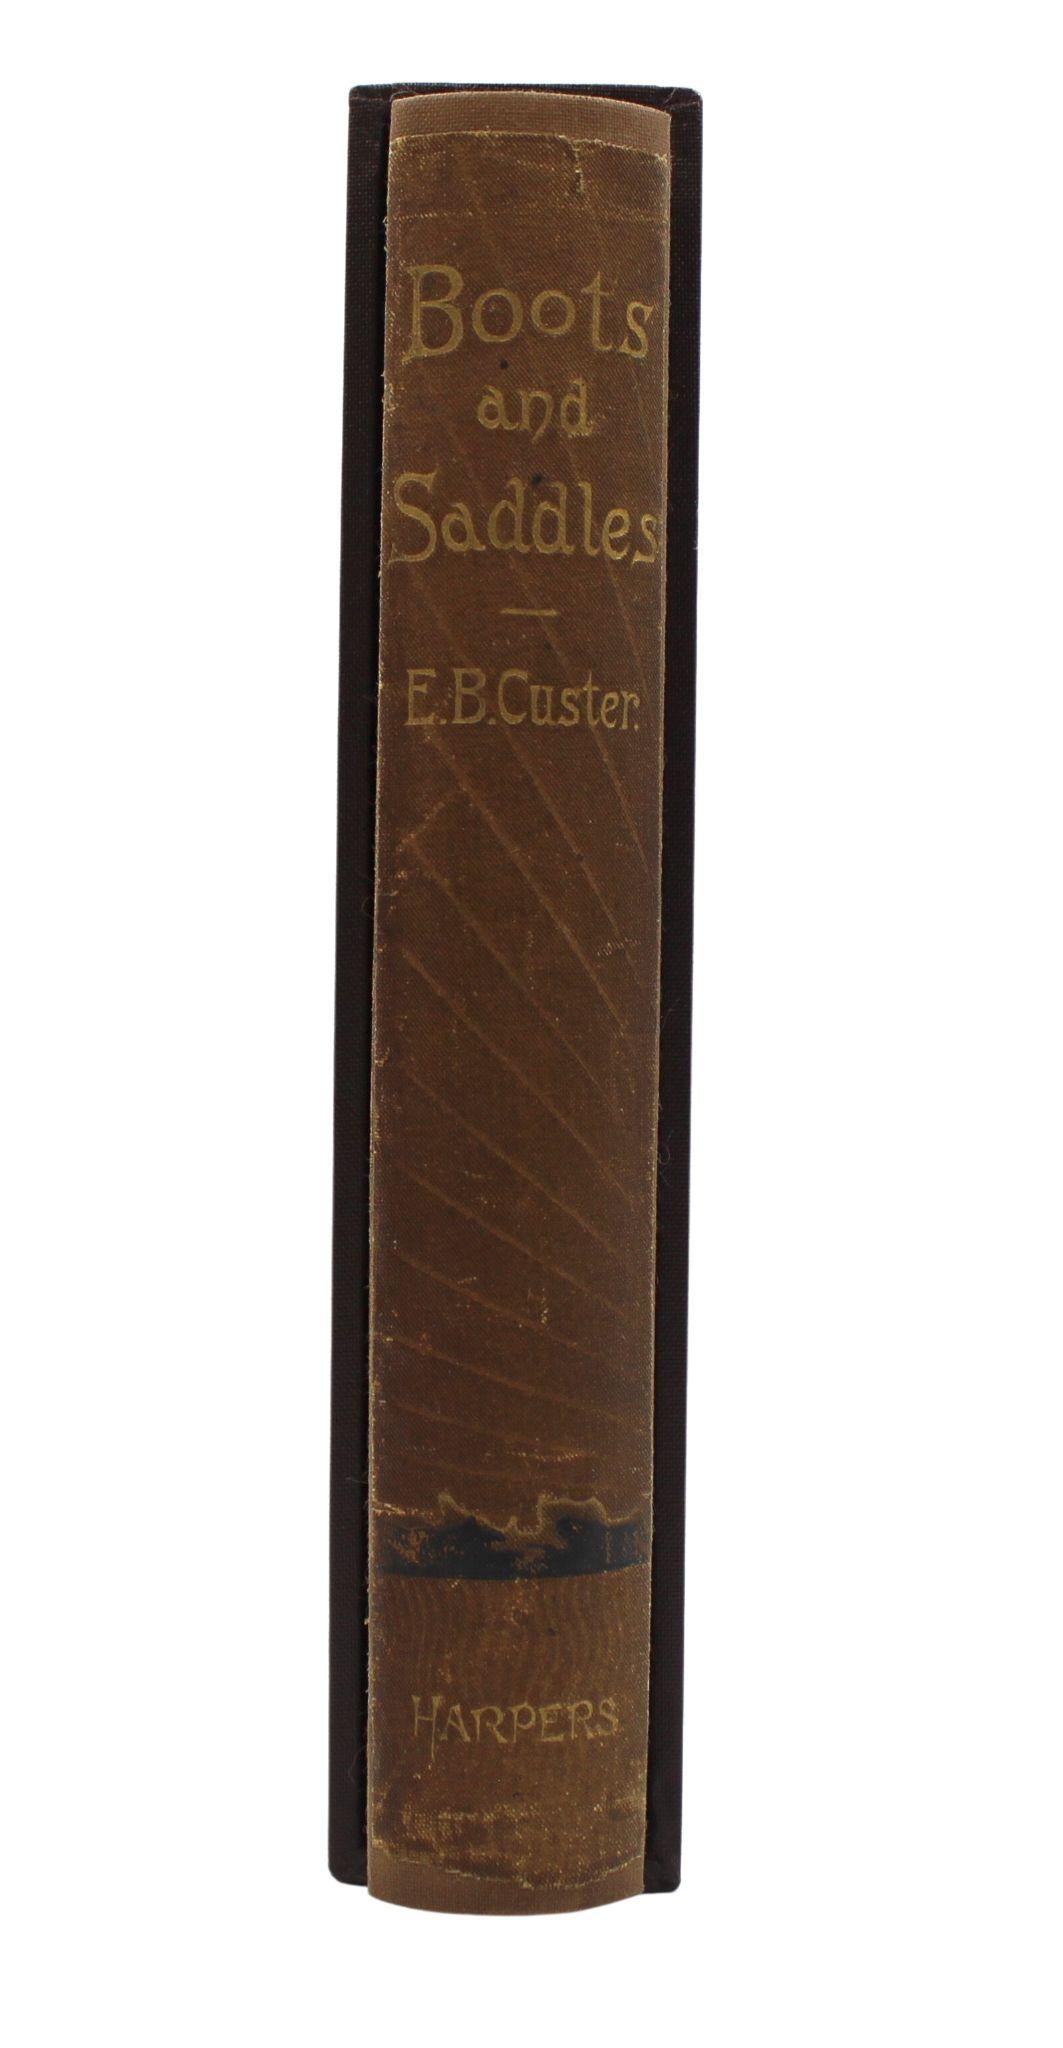 Boots and Saddles by Elizabeth B. Custer, First Edition, 1885 For Sale 7